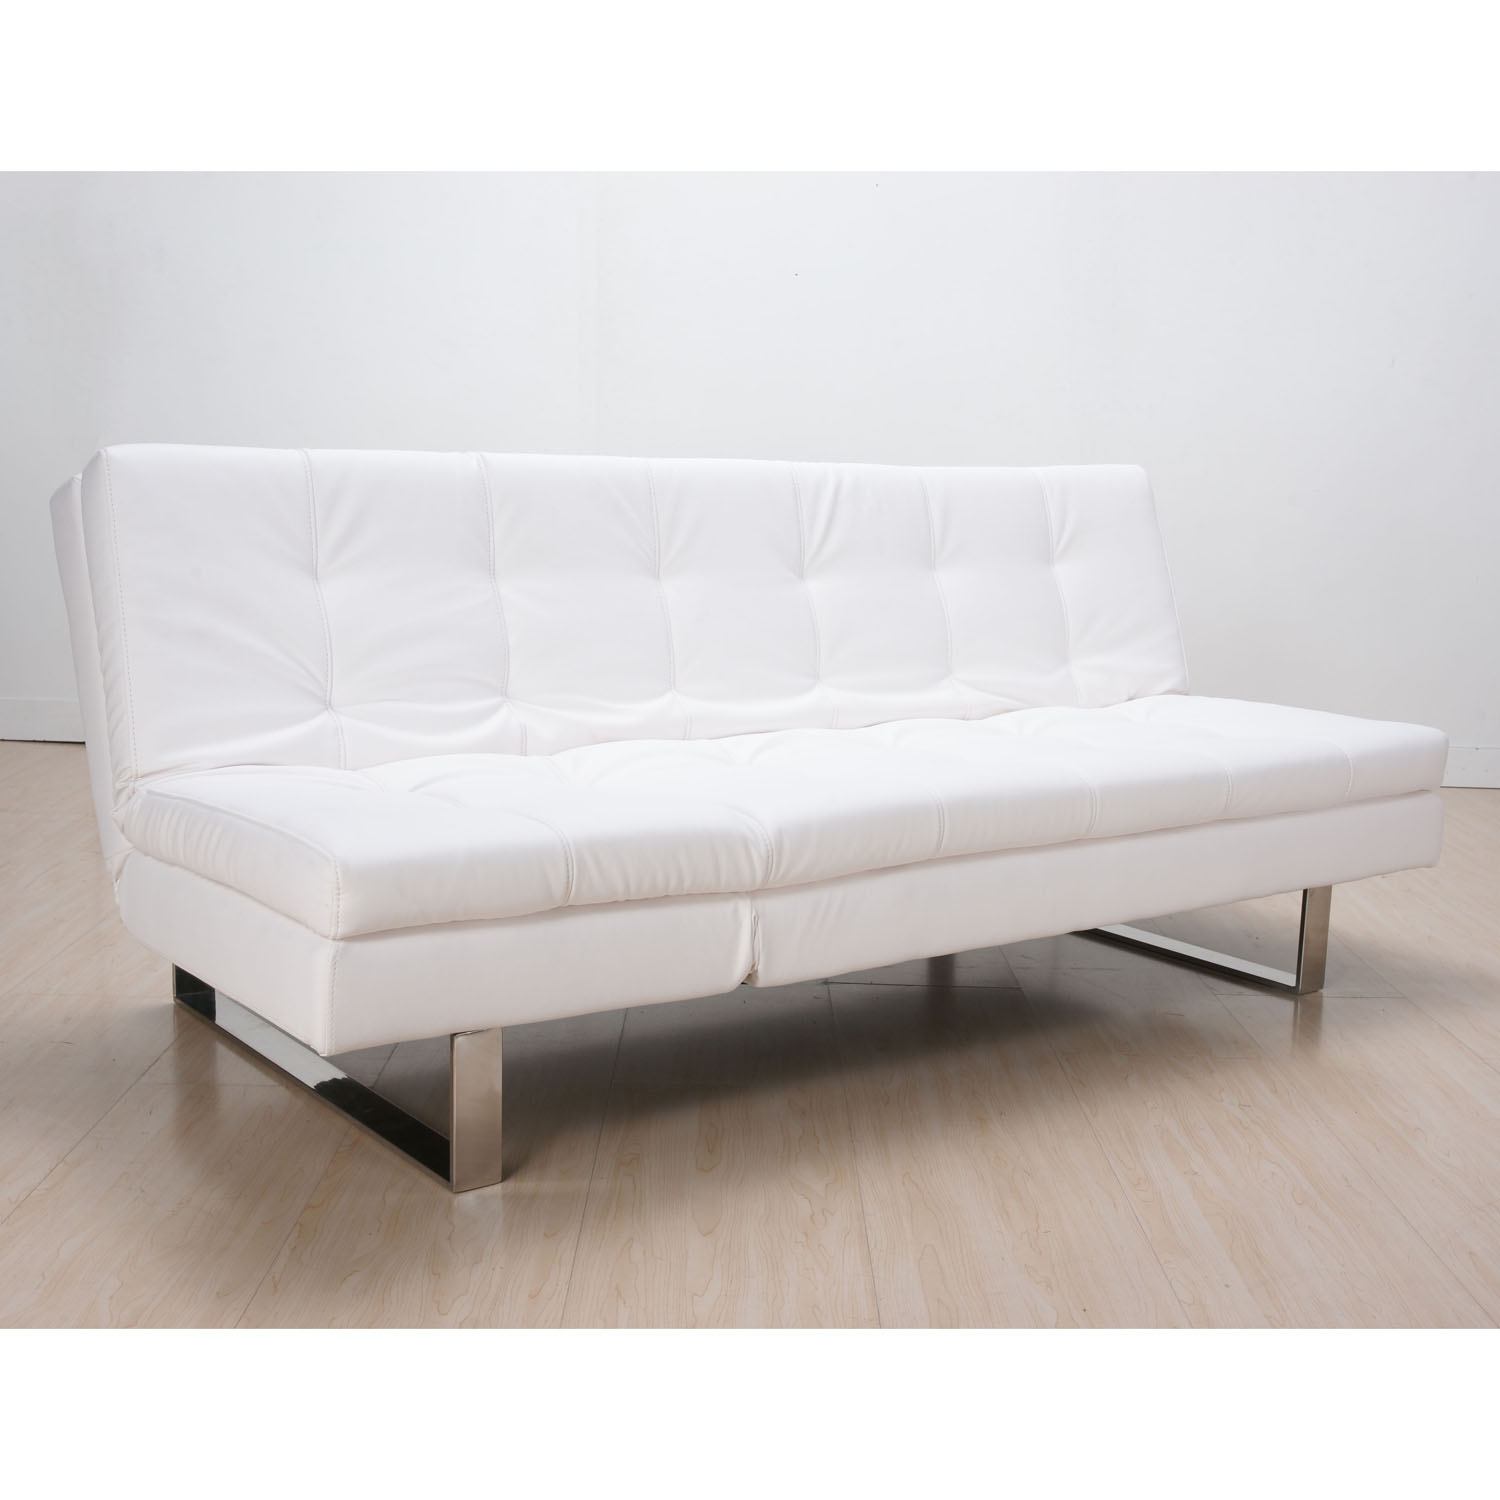 white sofa bed simple white sofa bed on white sofa beds JTYWHTY